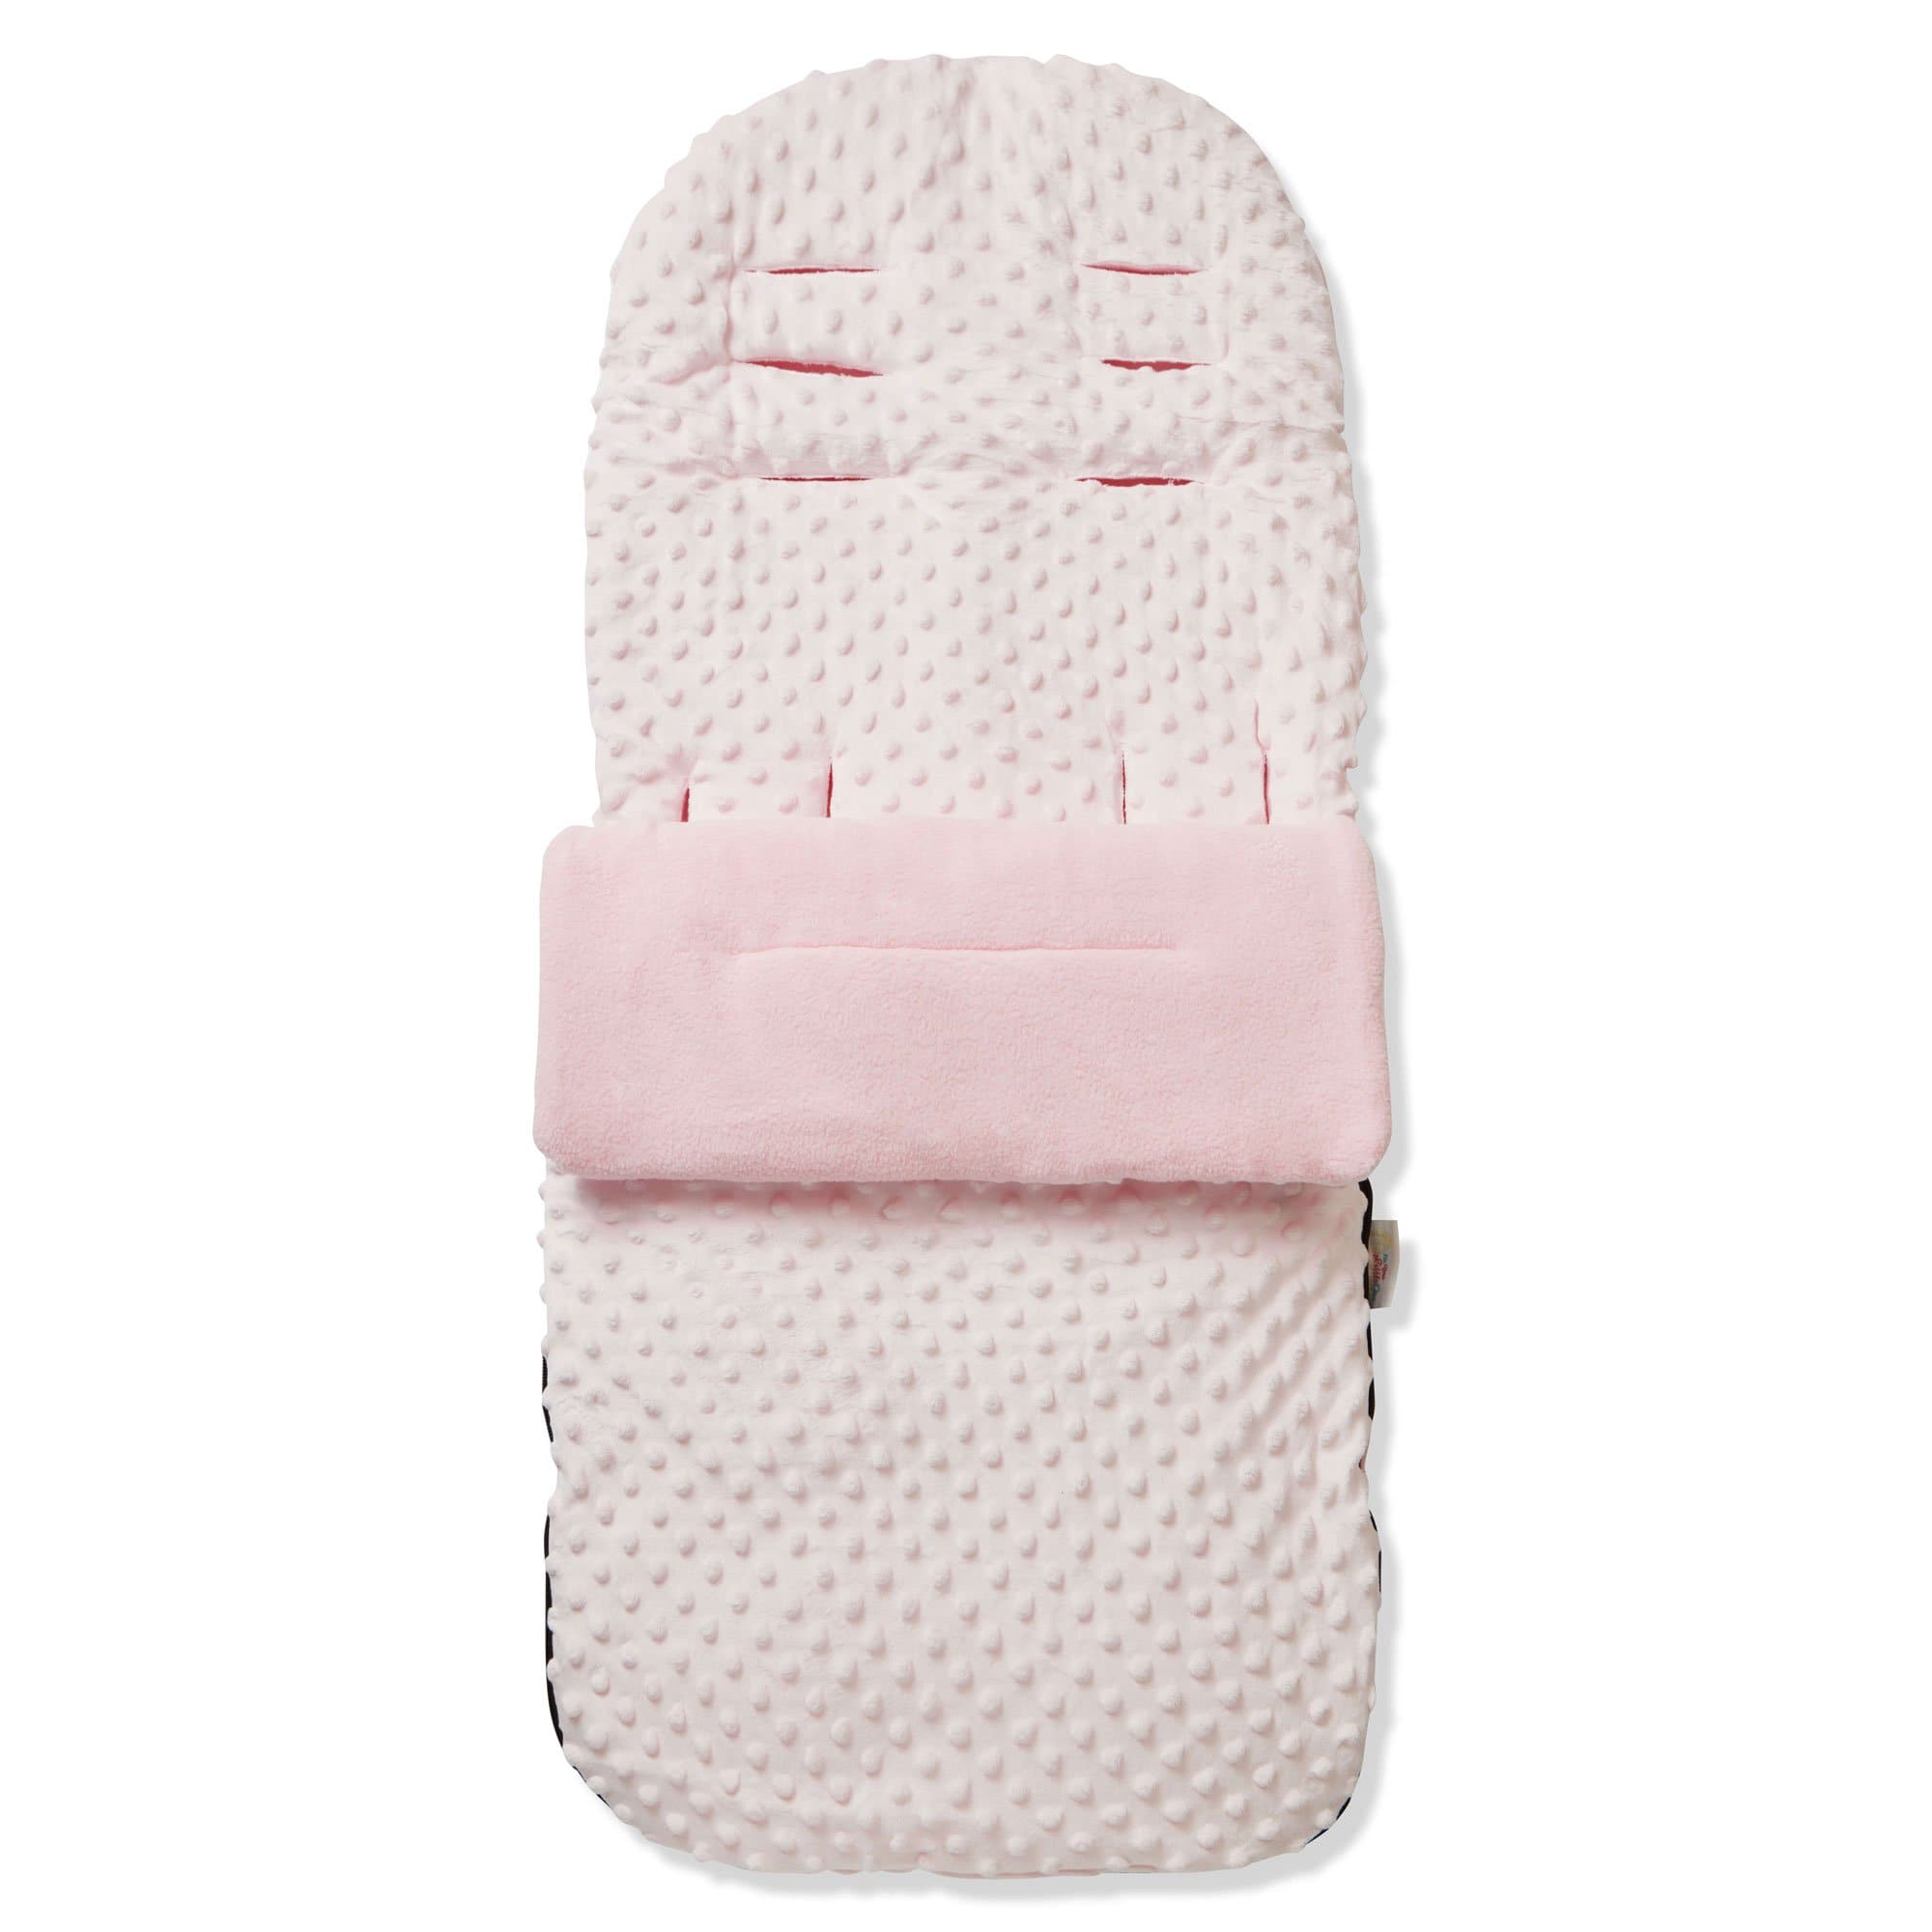 Dimple Footmuff / Cosy Toes Compatible with Red Castle - Pink / Fits All Models | For Your Little One